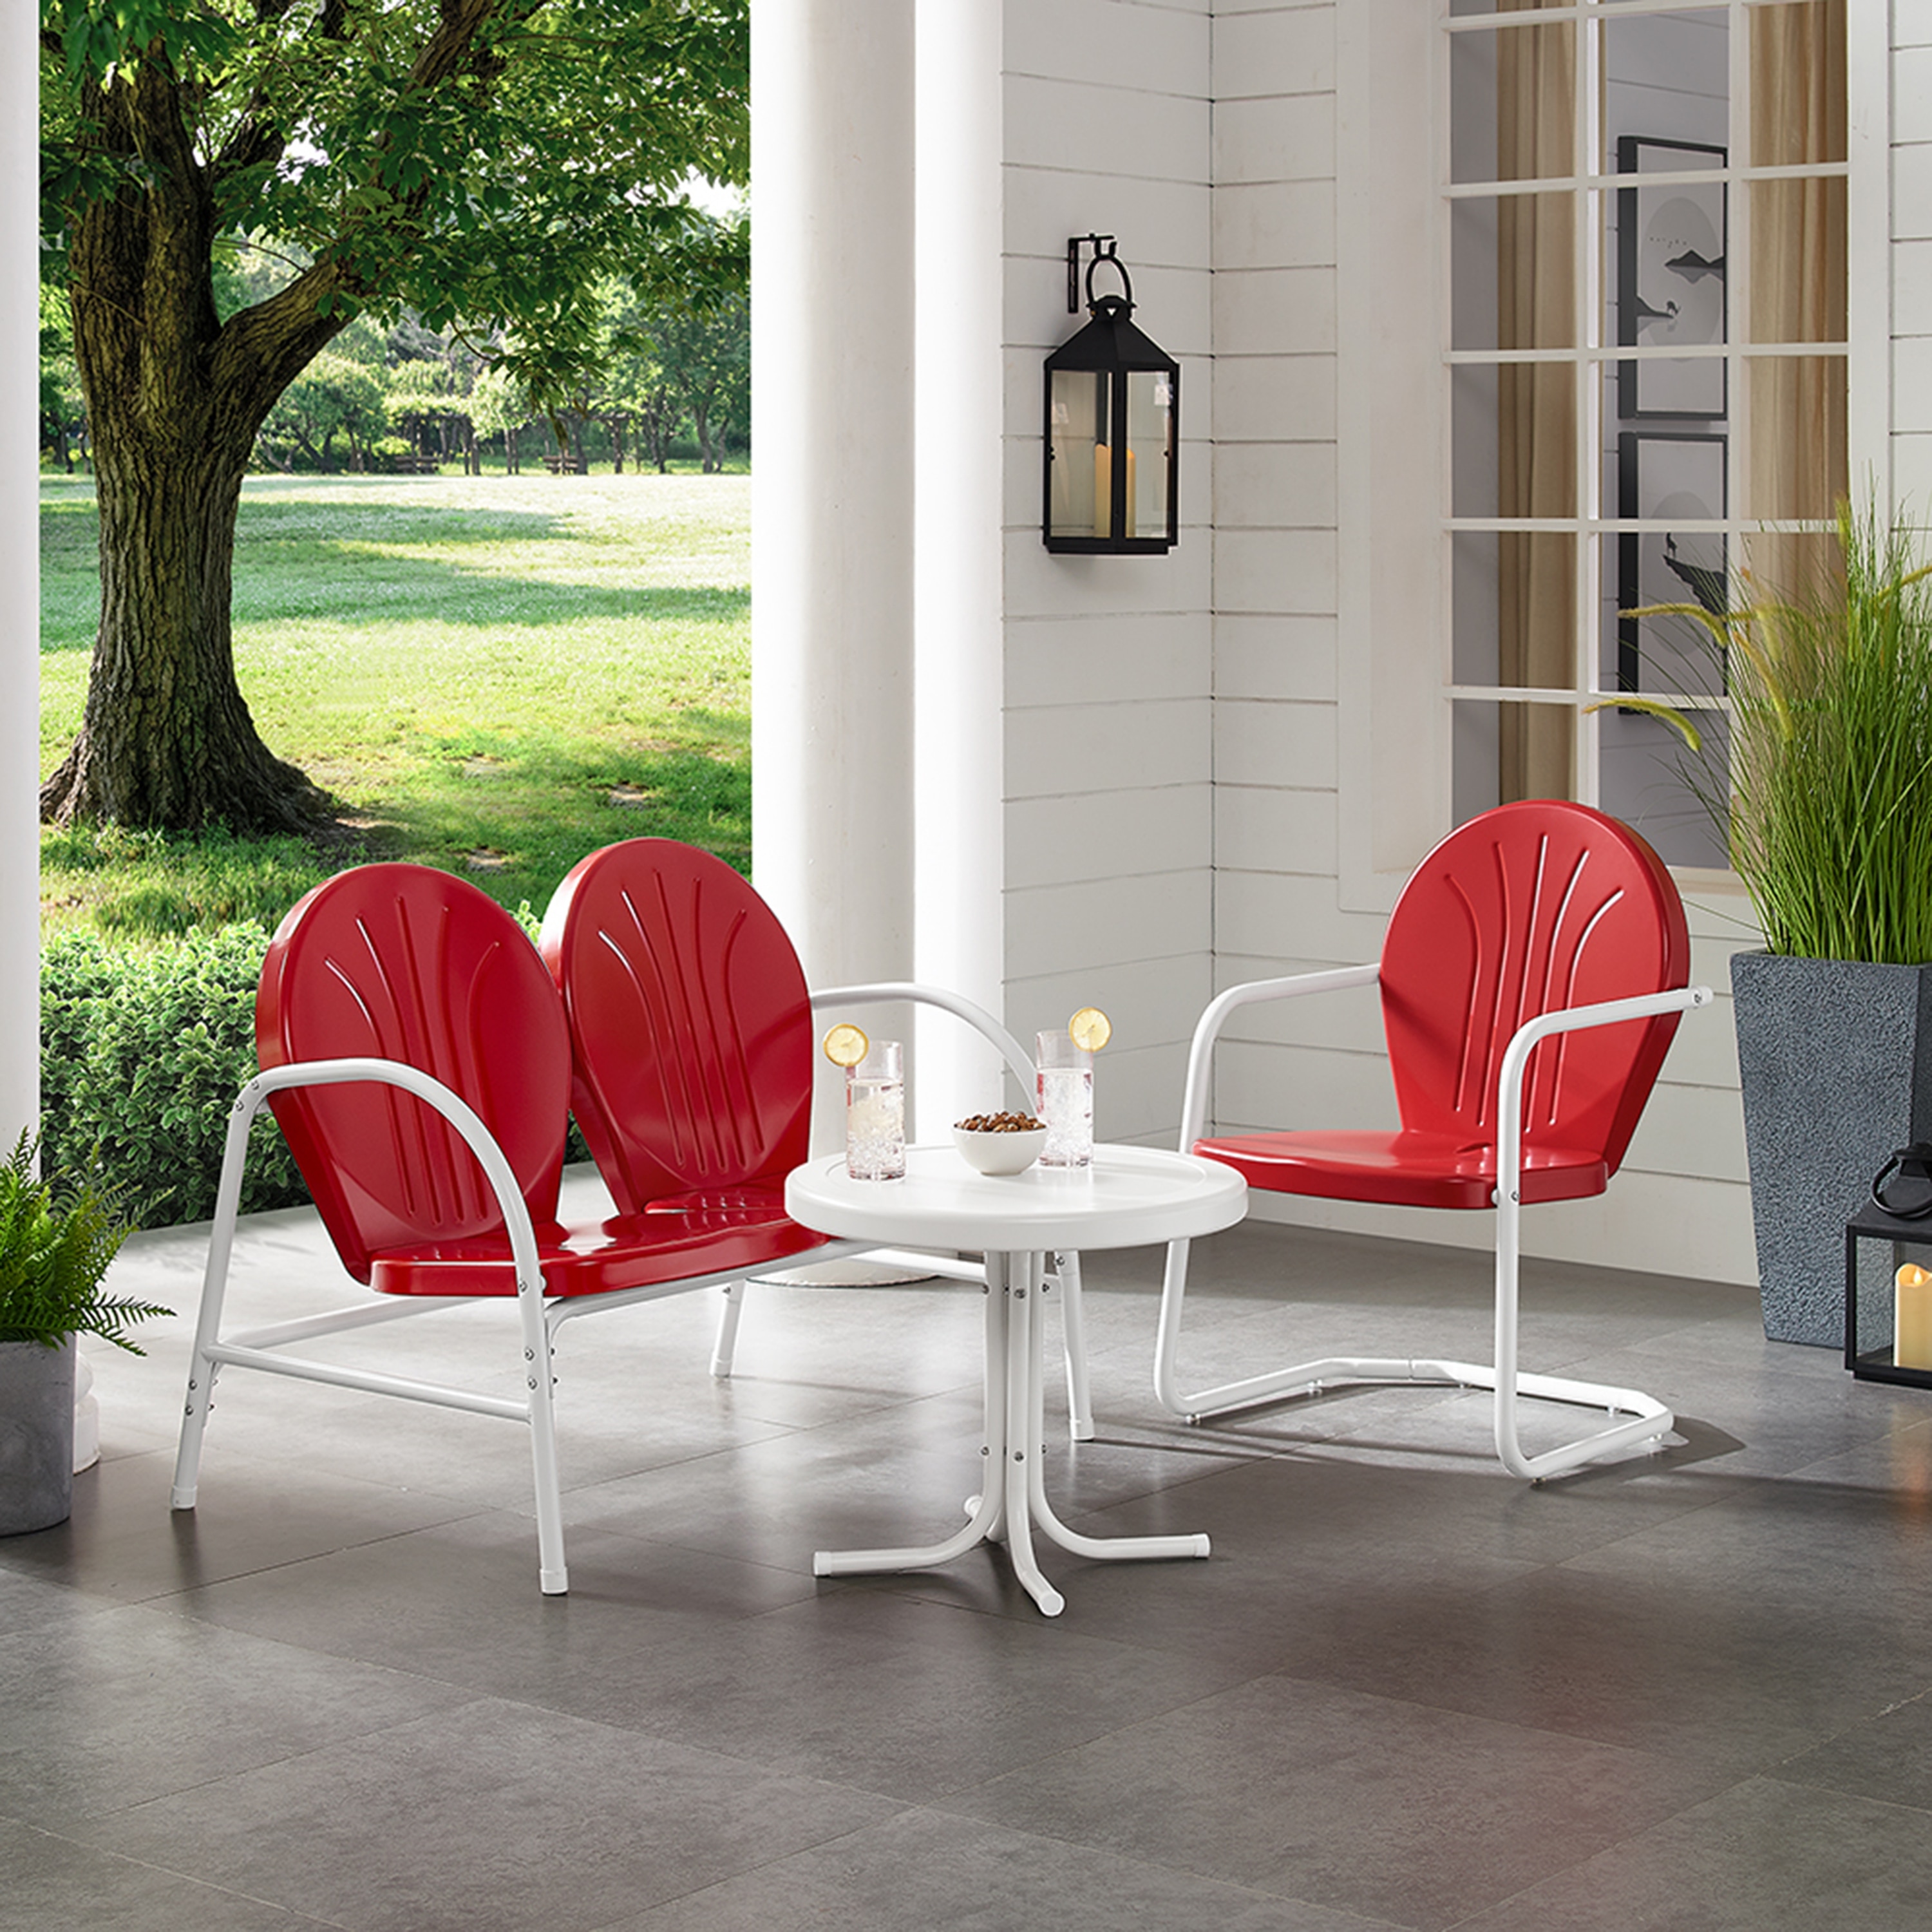 GRIFFITH METAL CHAIR IN RED FINISH